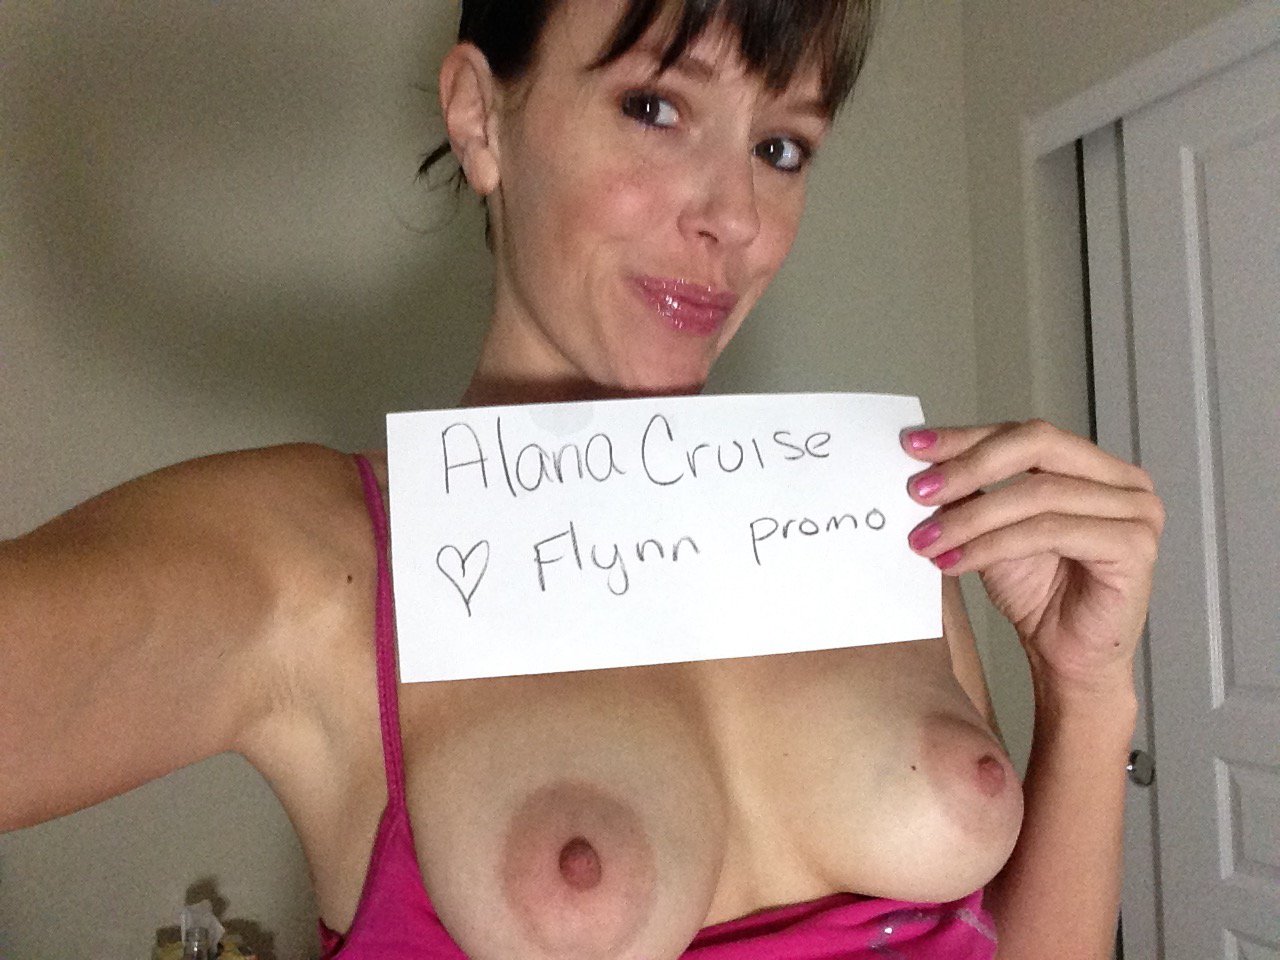 FanSign from the fantastic @AlanaCruisexxx